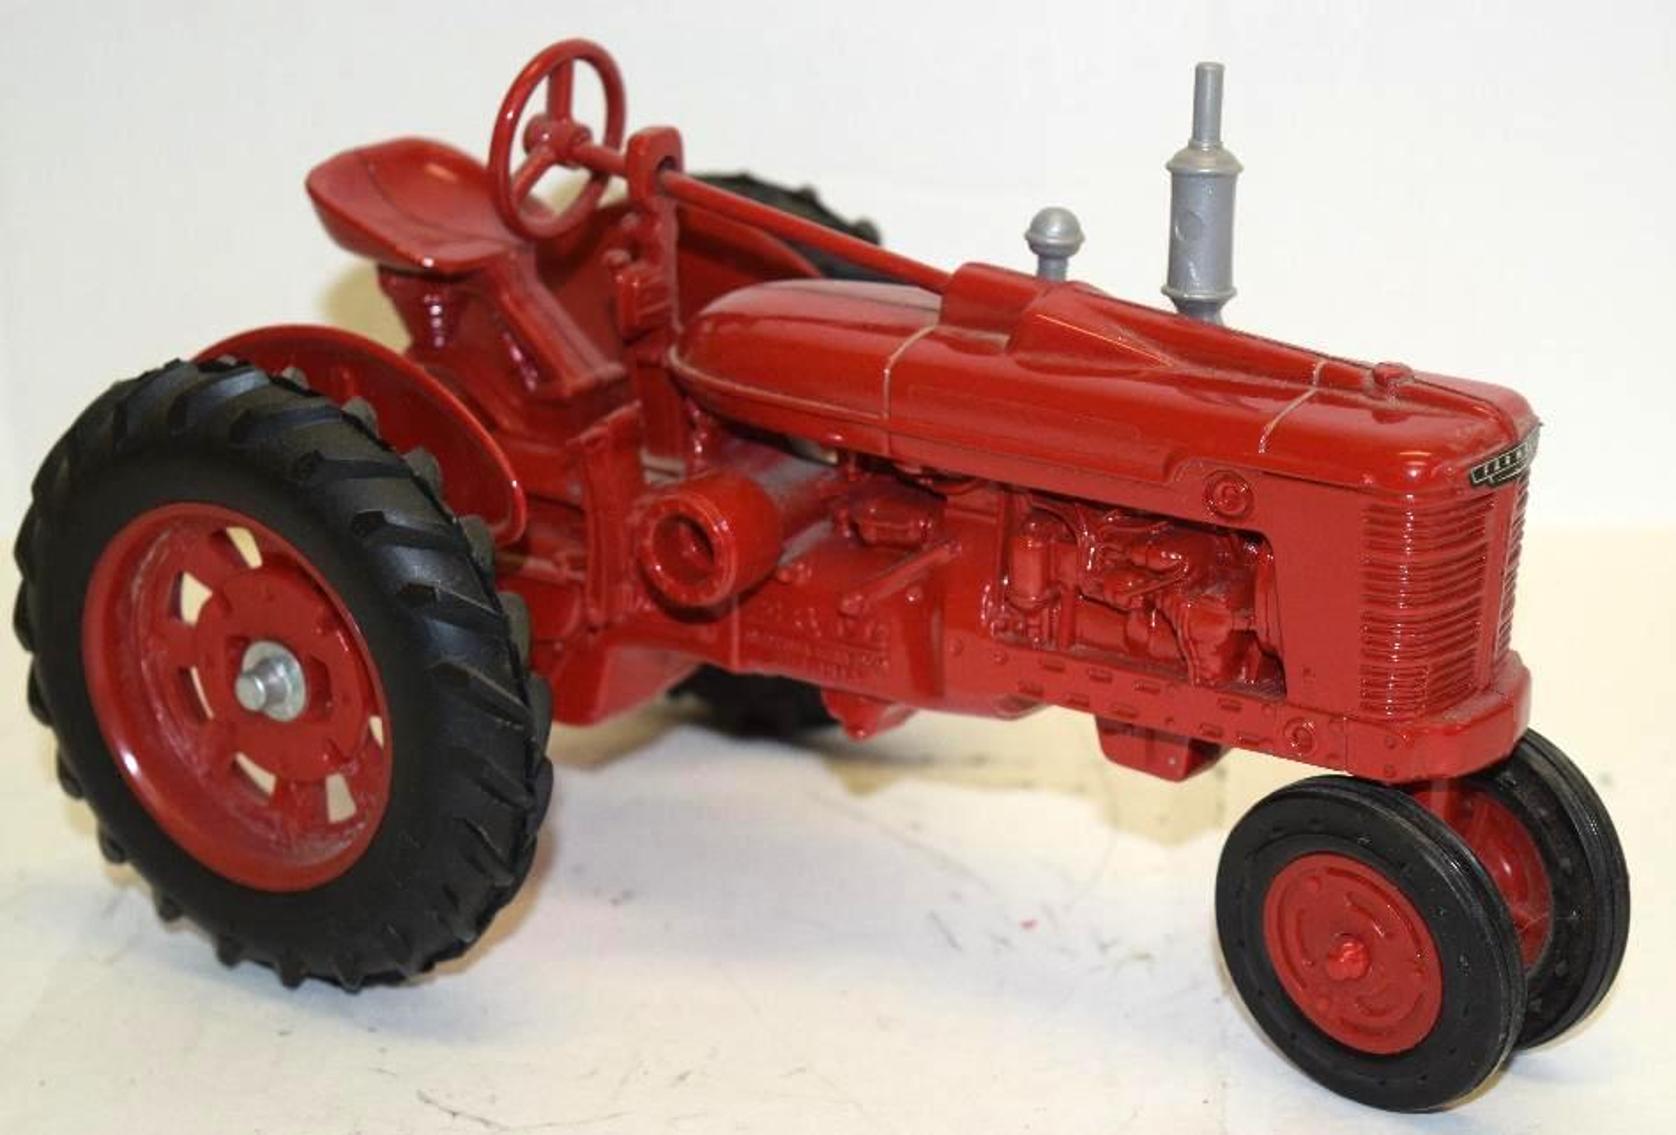 Pedal Tractors, Toy Tractors and Trucks